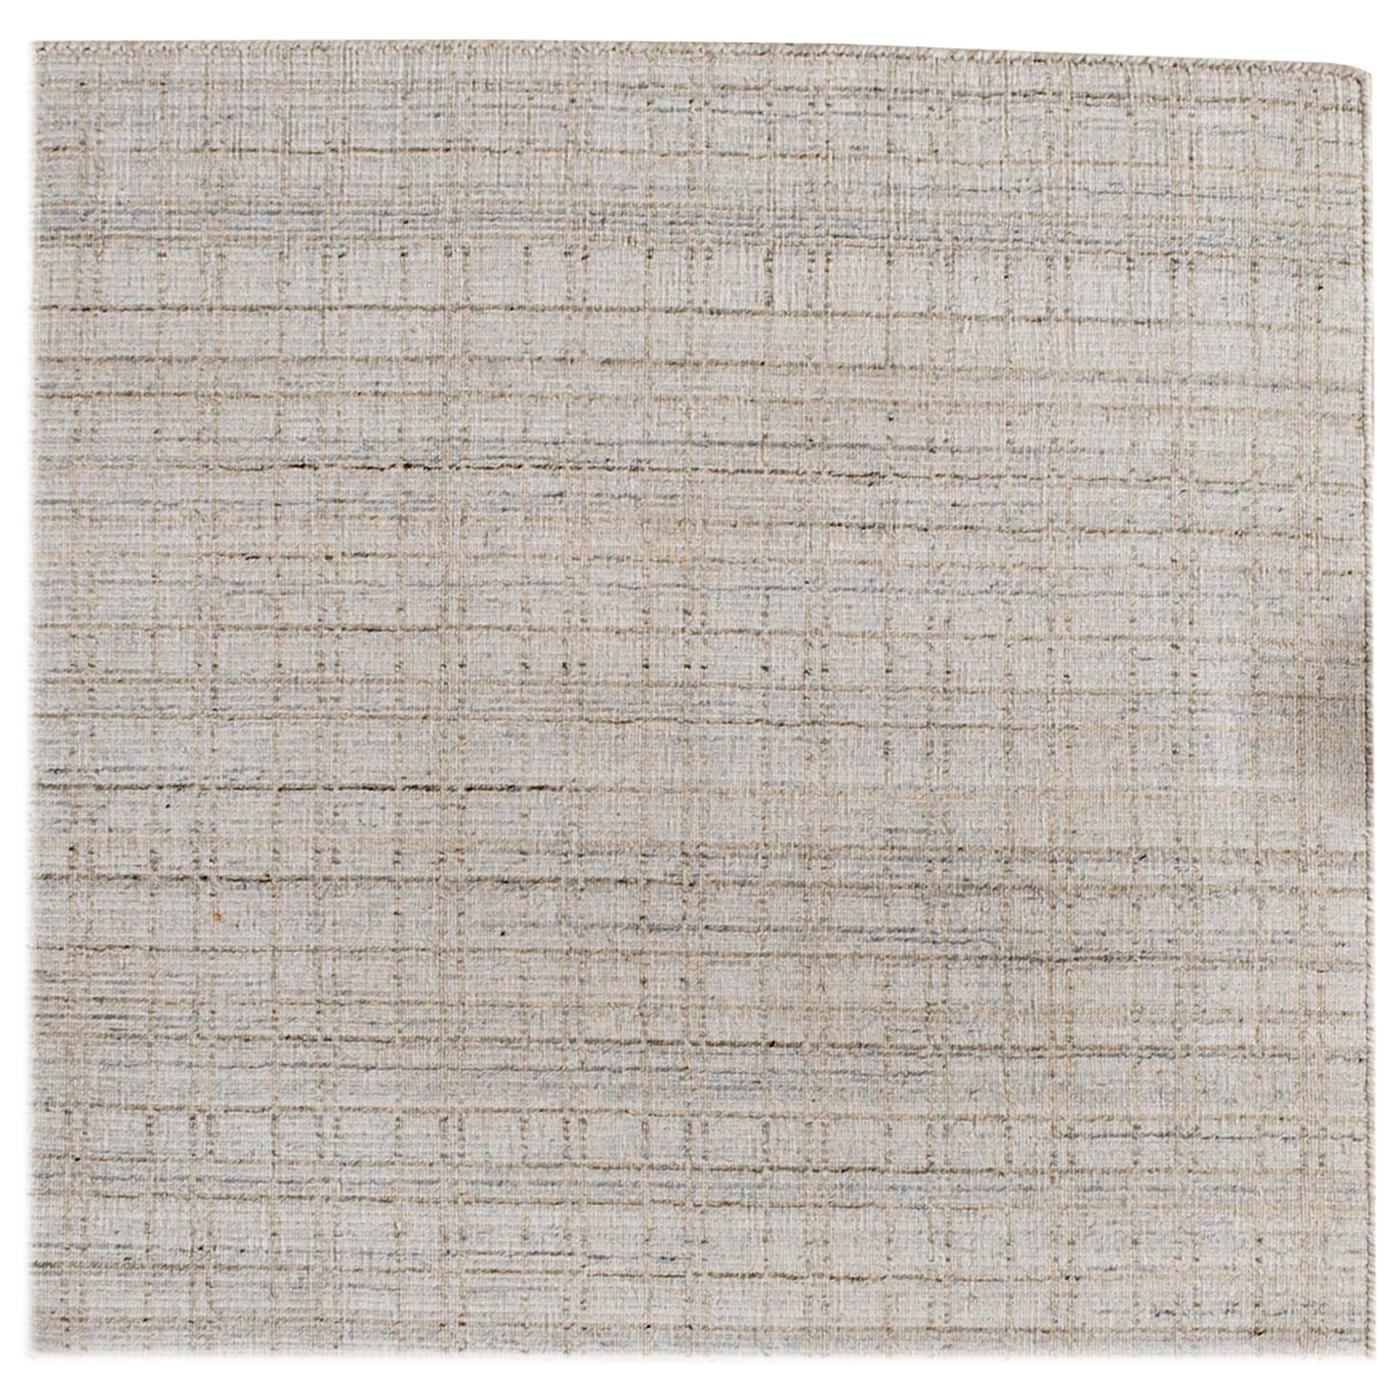 Tableau Collection in Beige off White